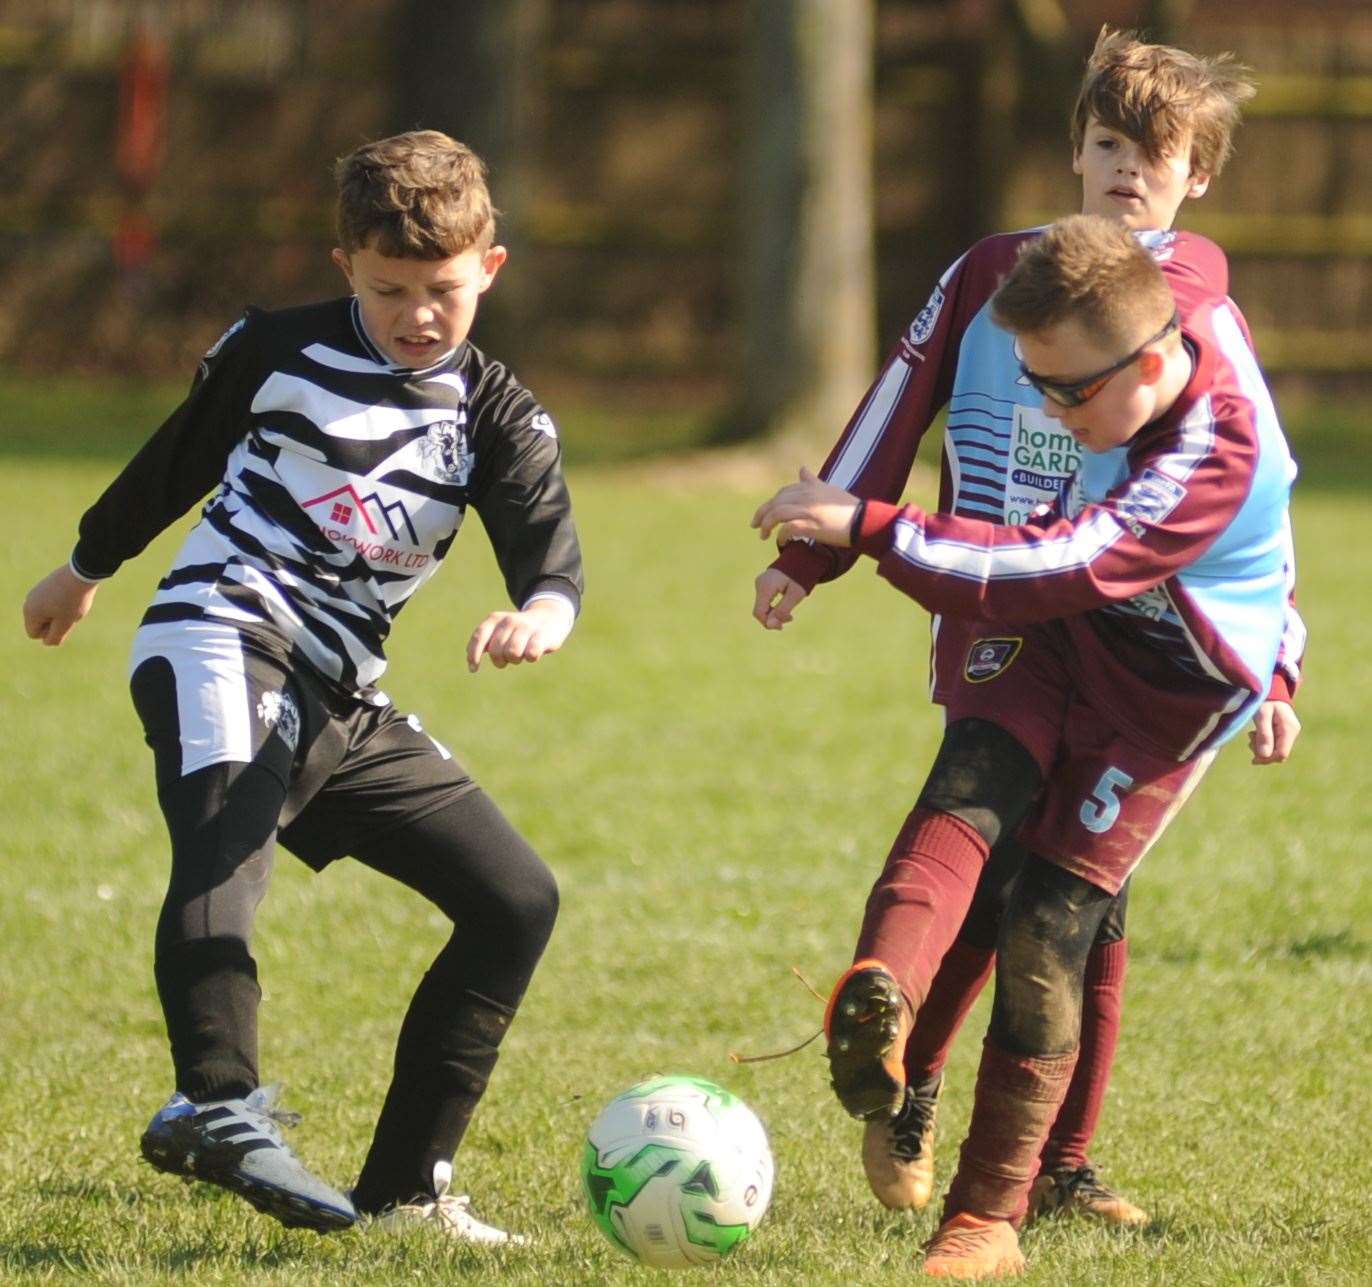 Wigmore Youth Wanderers under-11s take on Milton & Fulston United Zebras under-11s Picture: Steve Crispe FM8026675